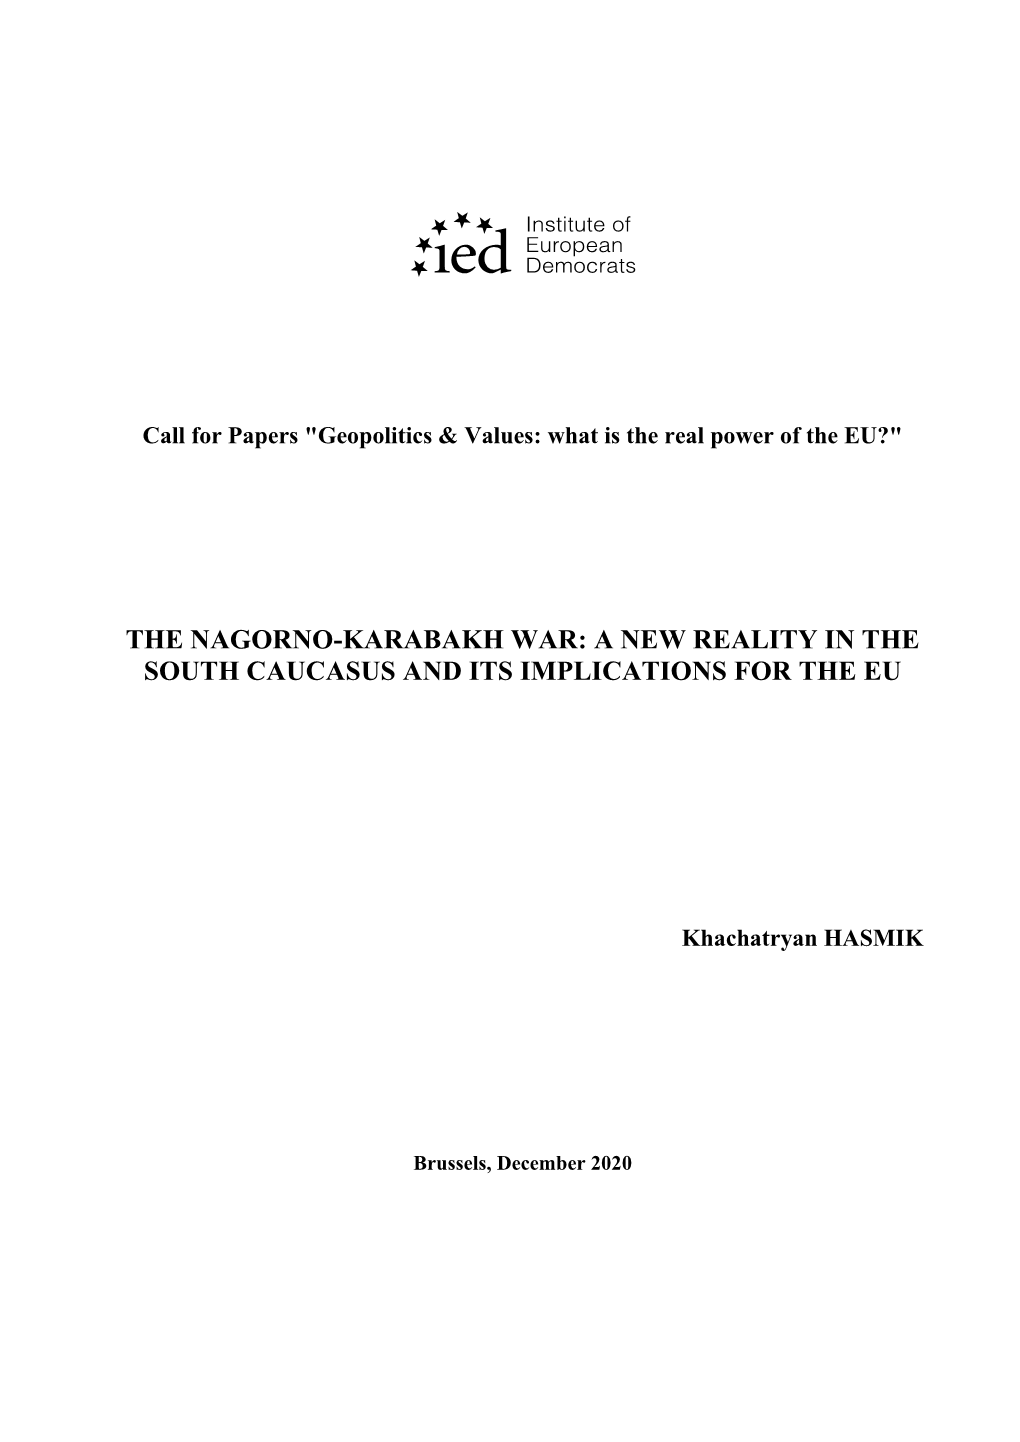 The Nagorno-Karabakh War: a New Reality in the South Caucasus and Its Implications for the Eu